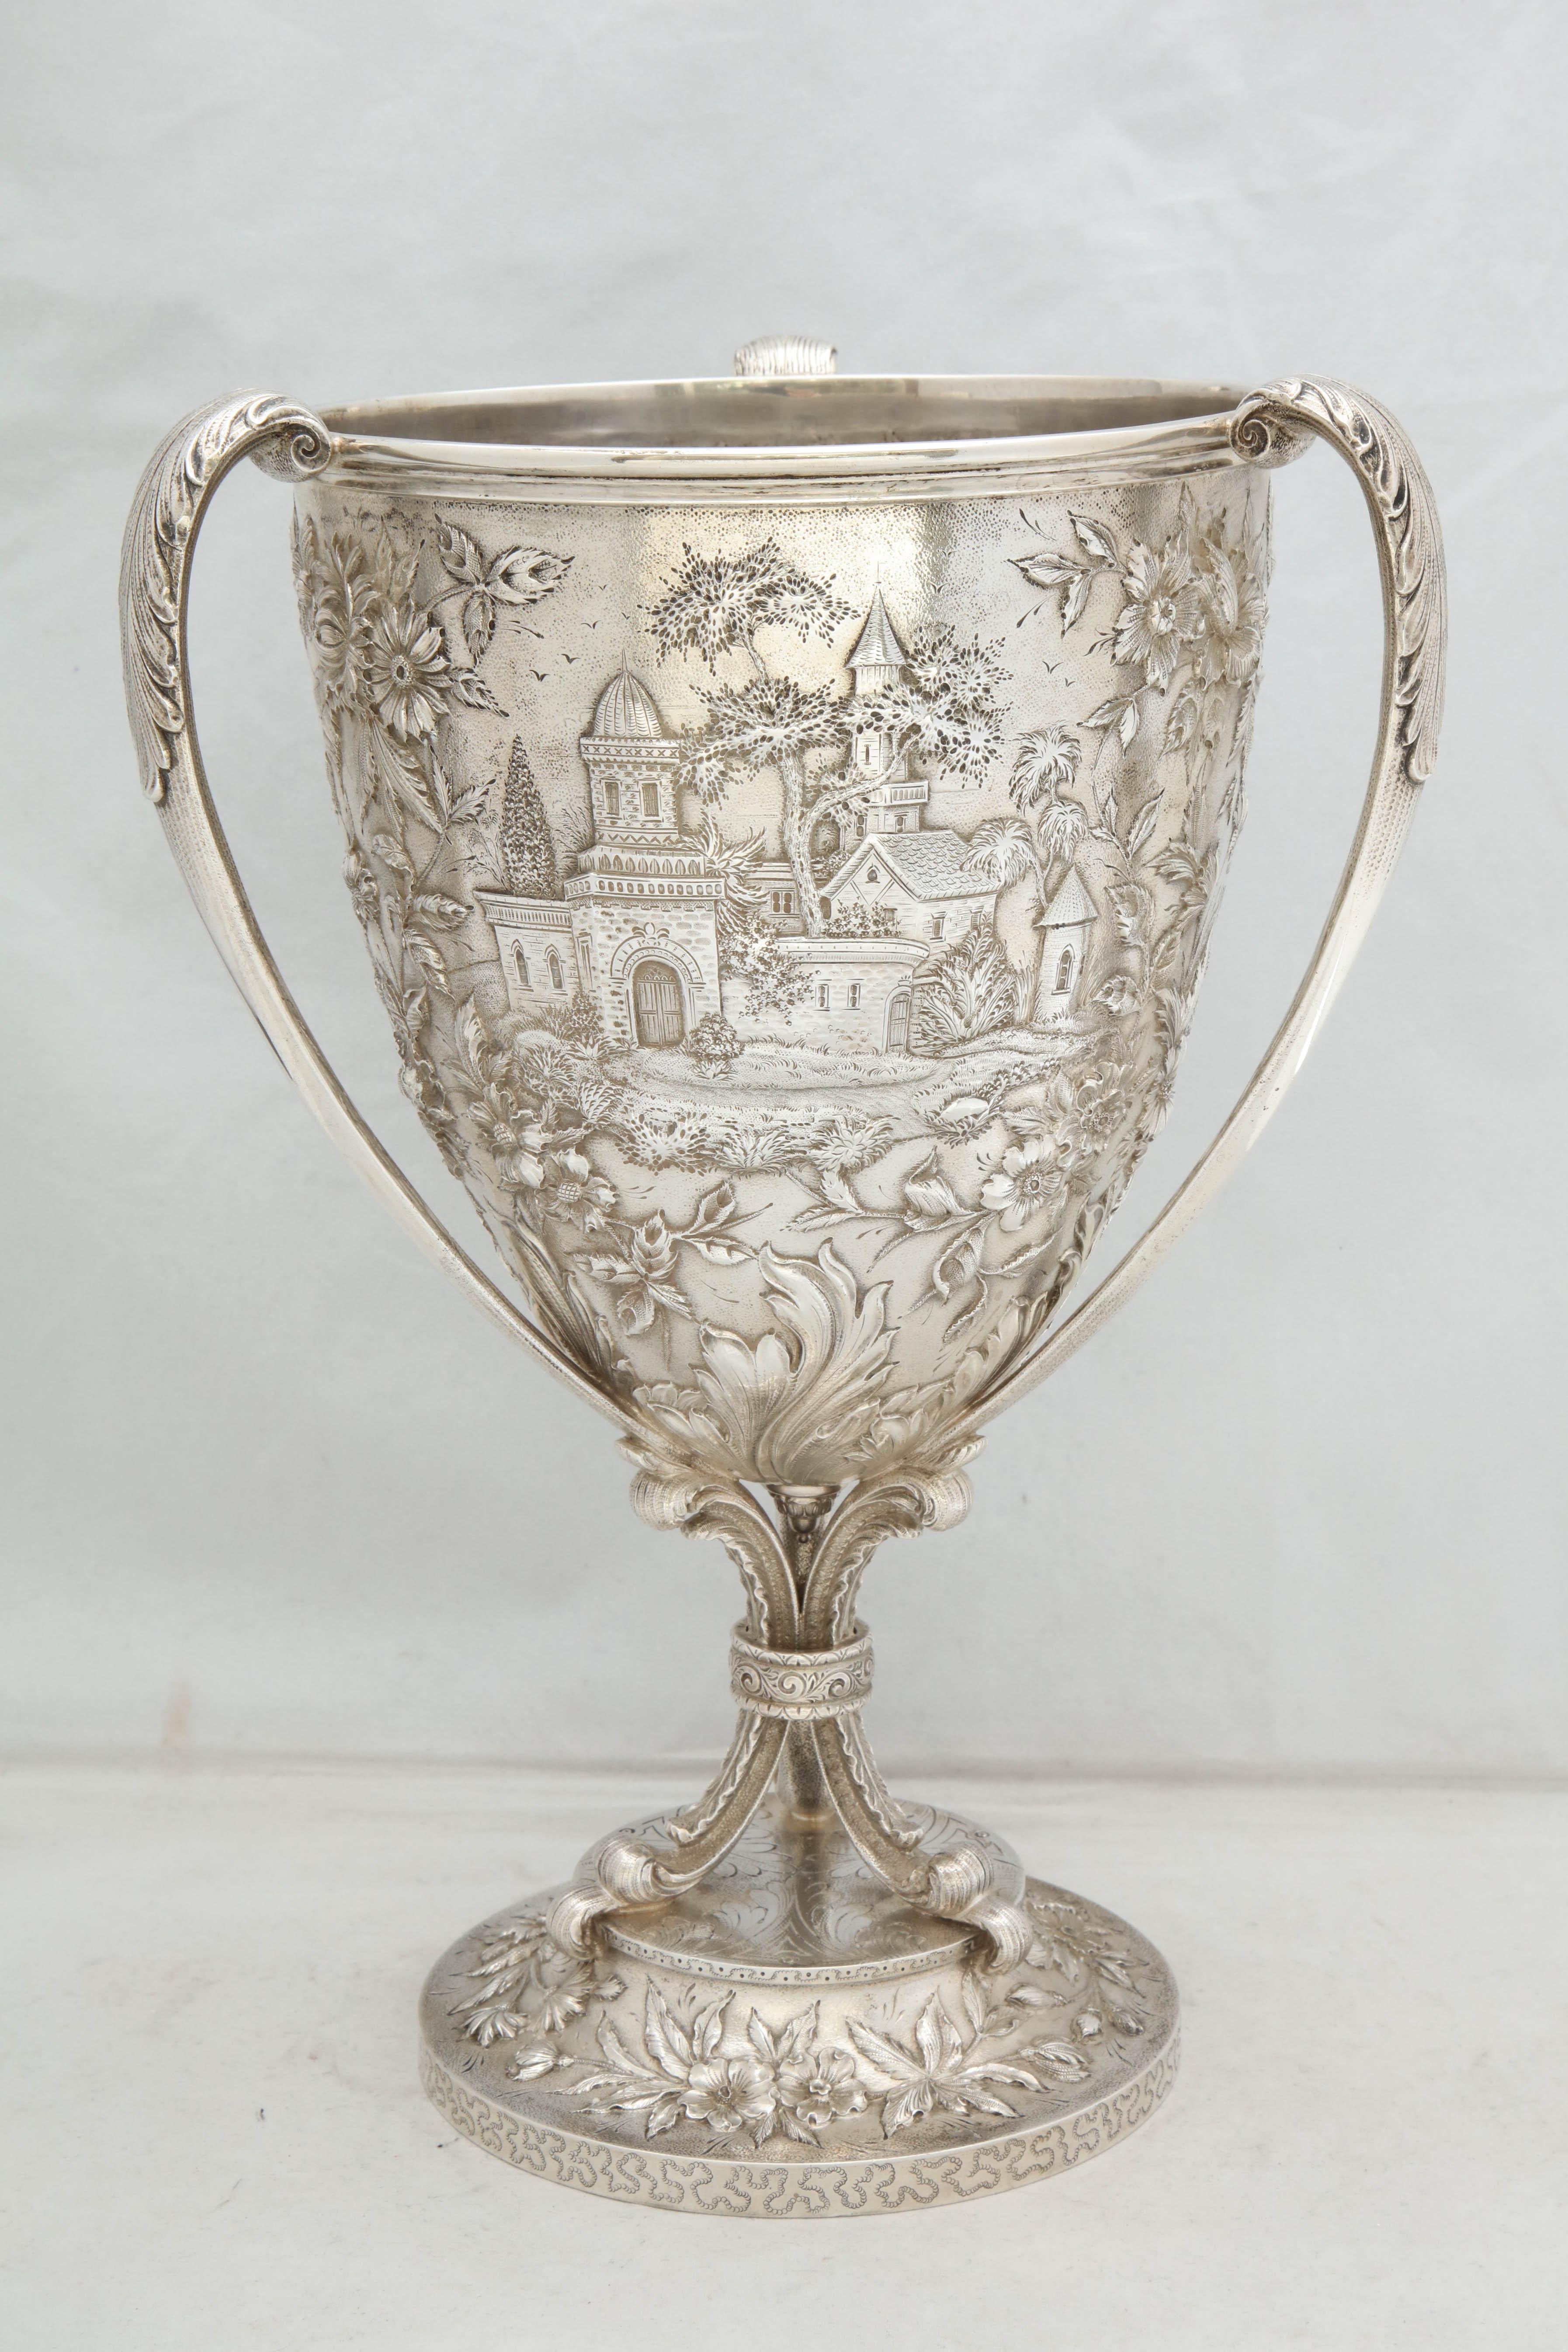 Late 19th Century Victorian, Sterling Silver Three-Handled Loving Cup by S. Kirk and Son